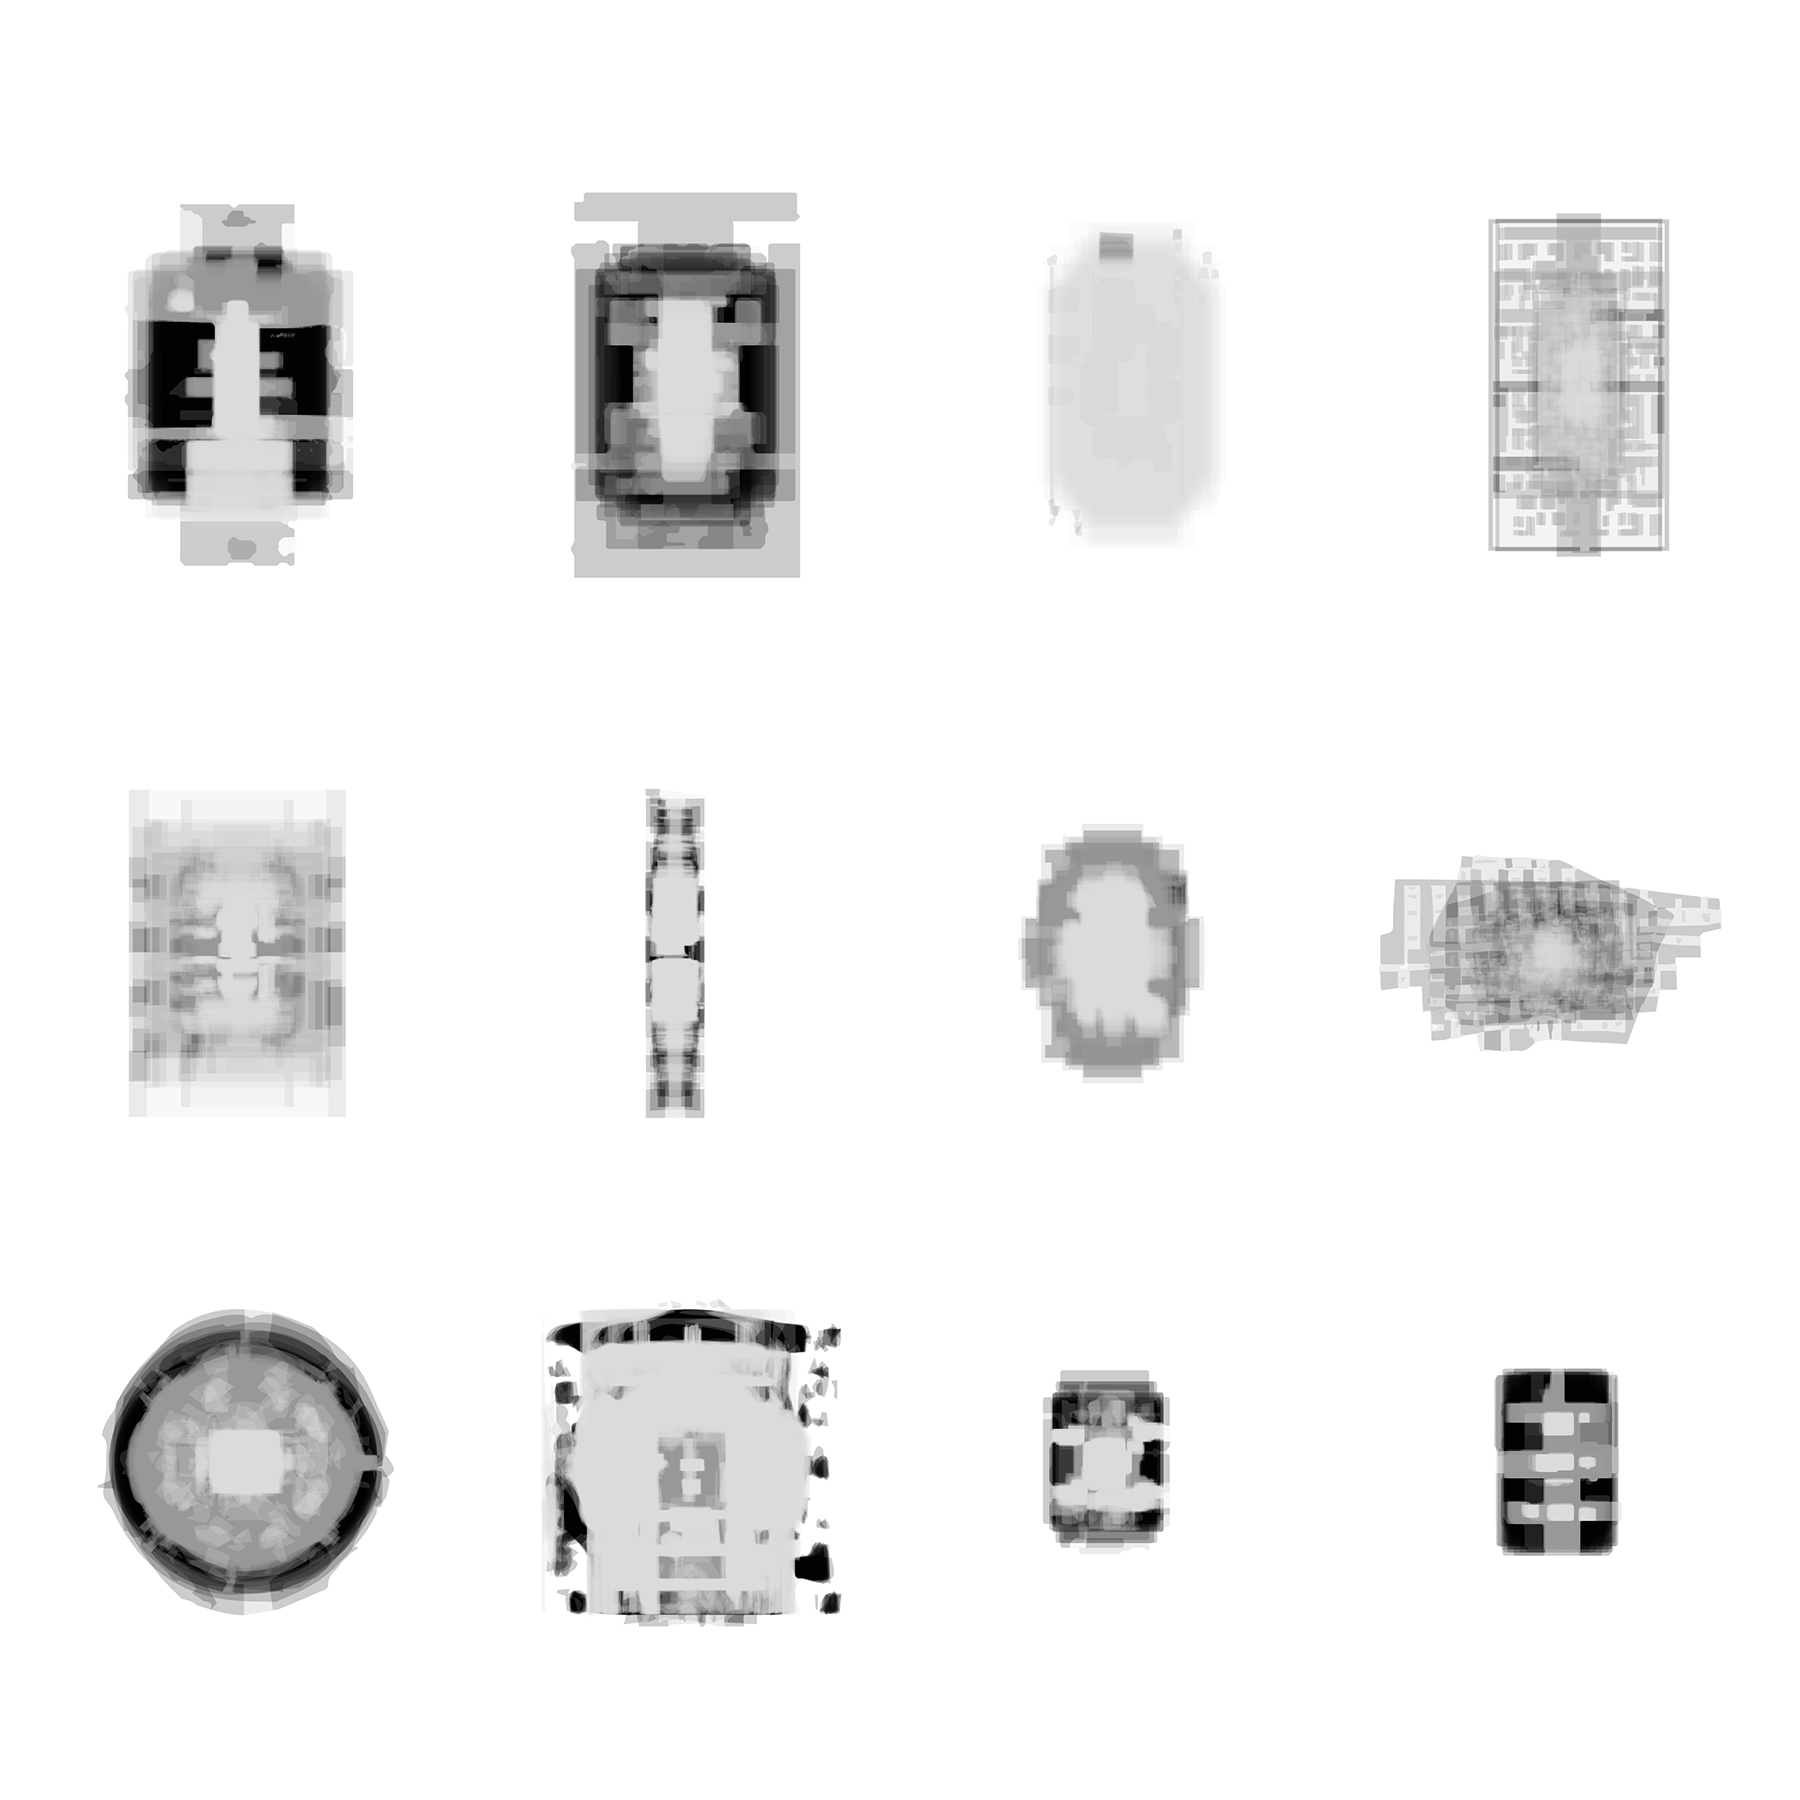 Neural Image Classifiers for Historical Building Elements and Typologies